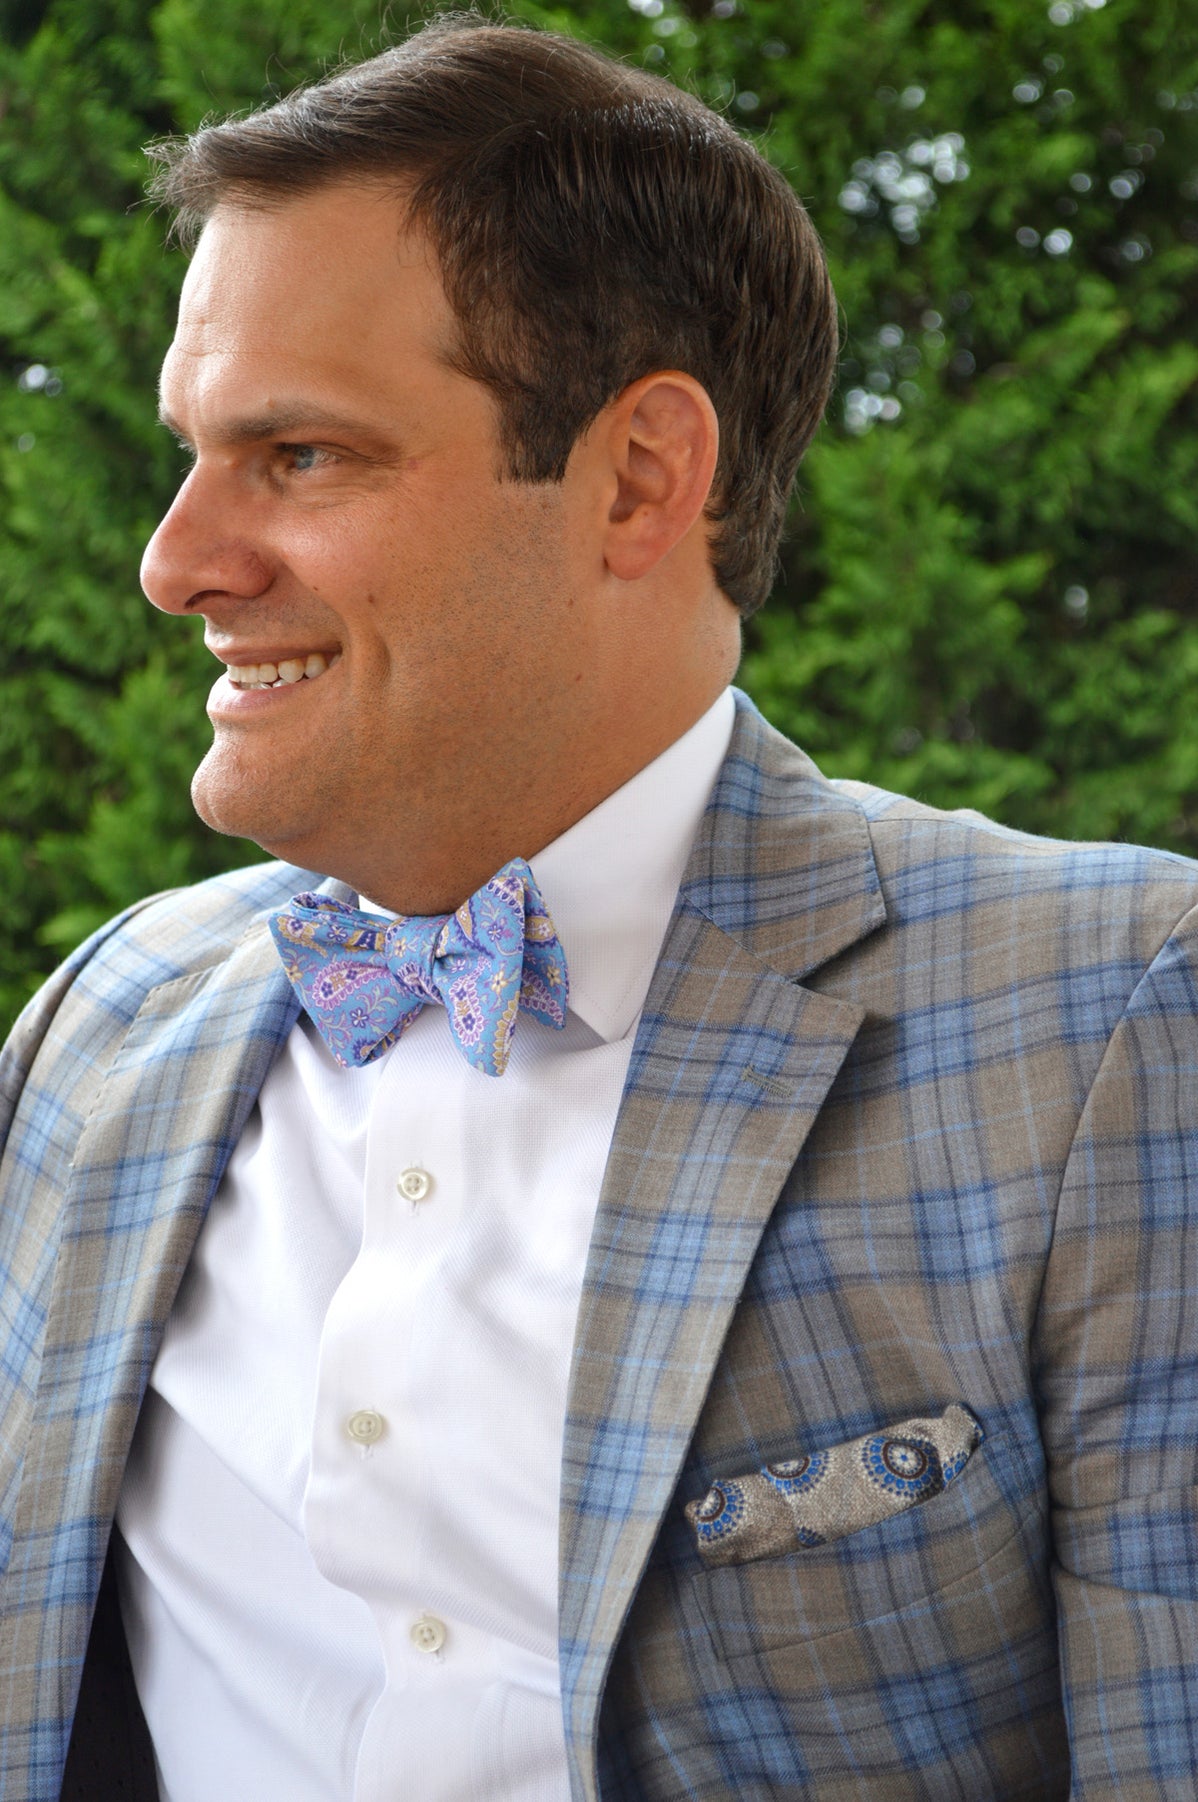 Madras Fabric: What It Is and Why You Should Wear It | R. Hanauer Bow Ties